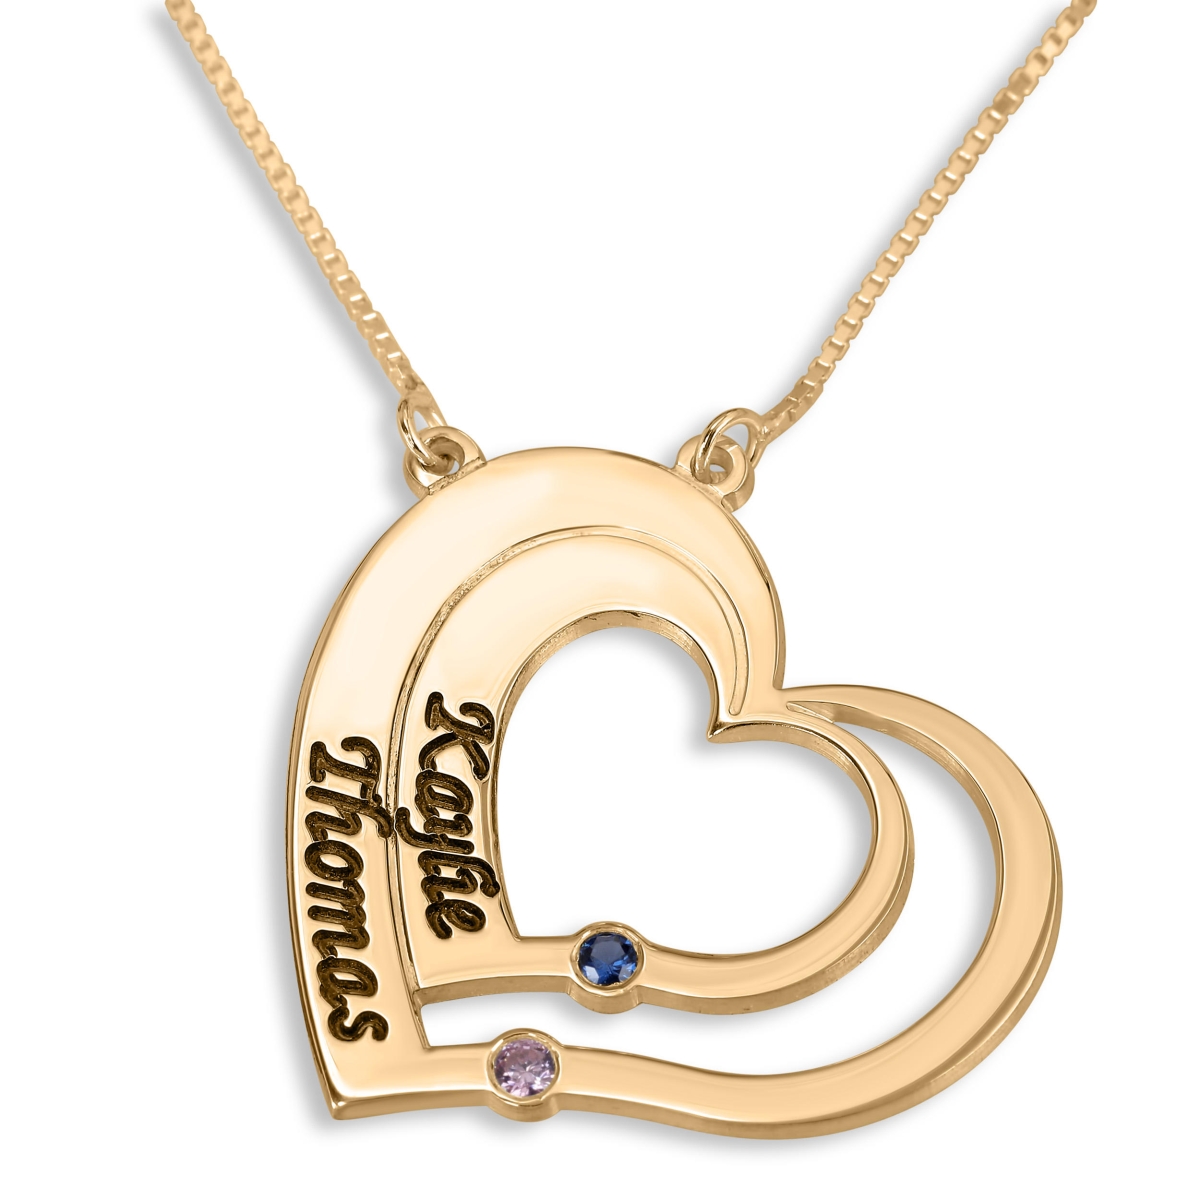 Double Thickness Double Heart Name Necklace With Birthstones, 24K Gold Plated - 1